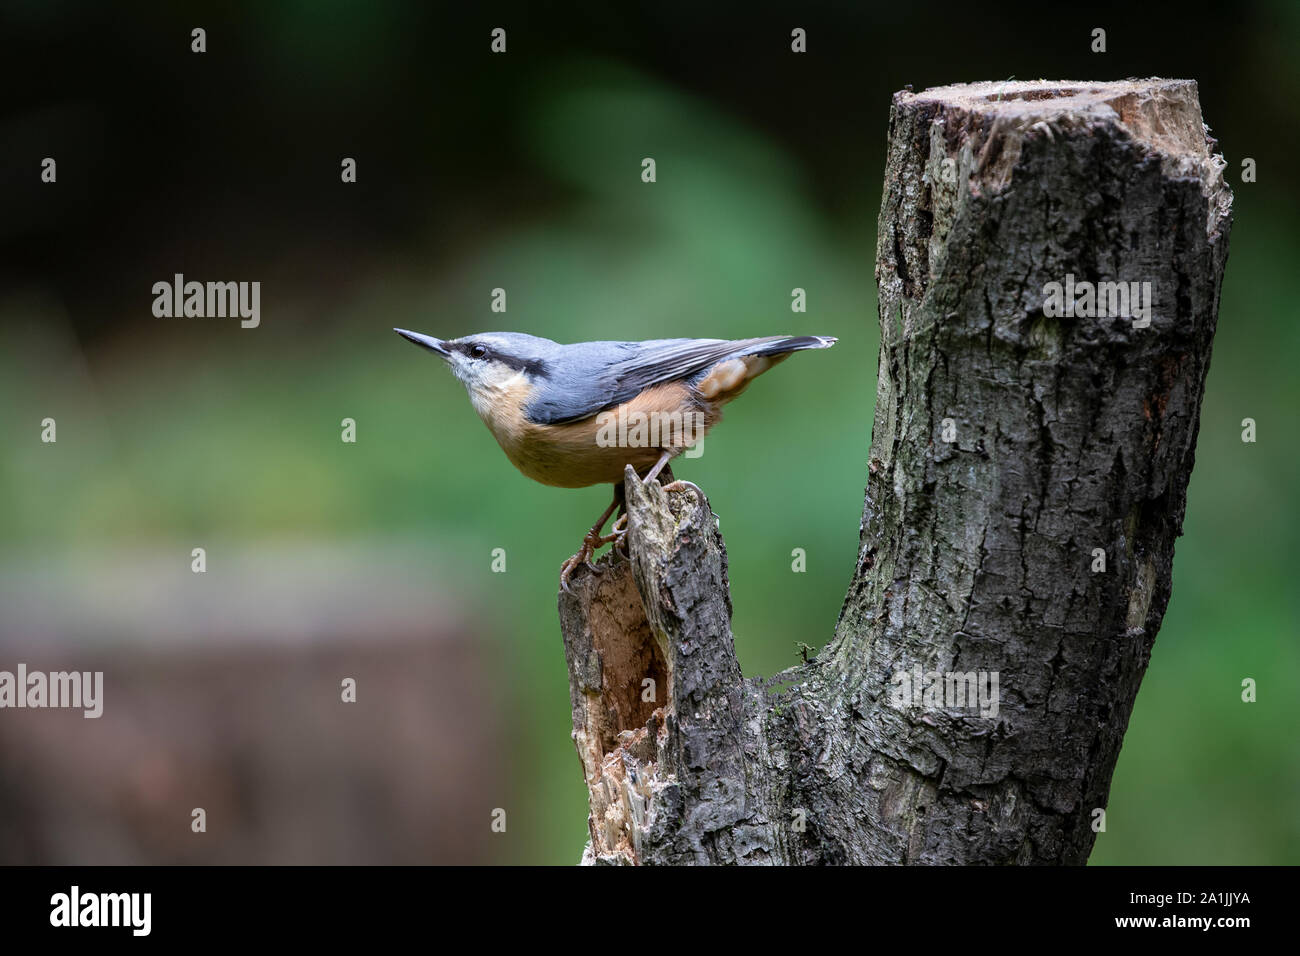 Nuthatch Sitta europaea in a jaunty position on a rotten wooden tree stump displaying its striking plumage against a diffuse background Stock Photo